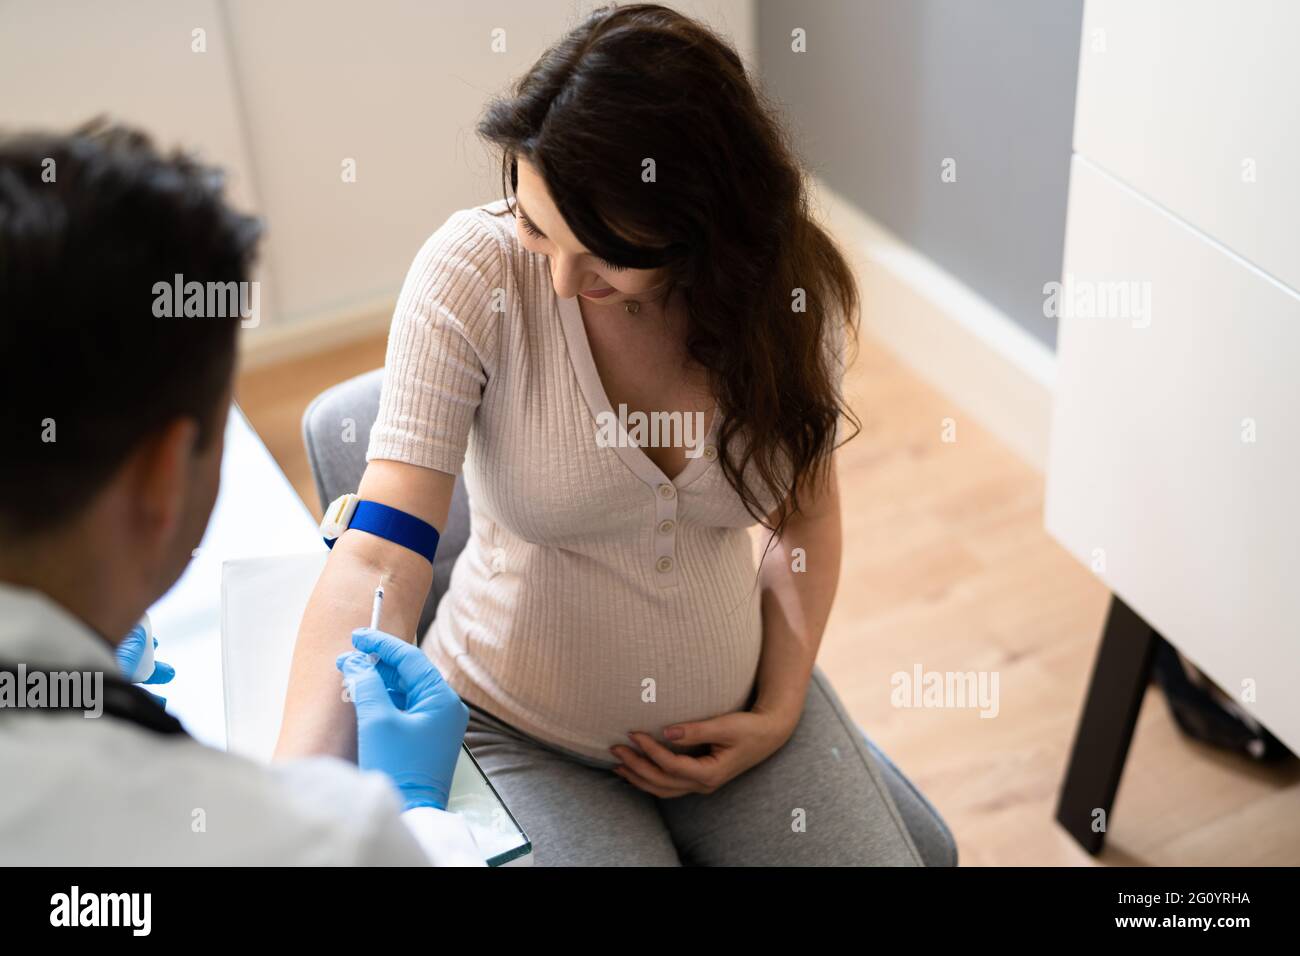 Prenatal Screening. Doctor Drawing Blood Sample From Pregnant Woman Stock Photo